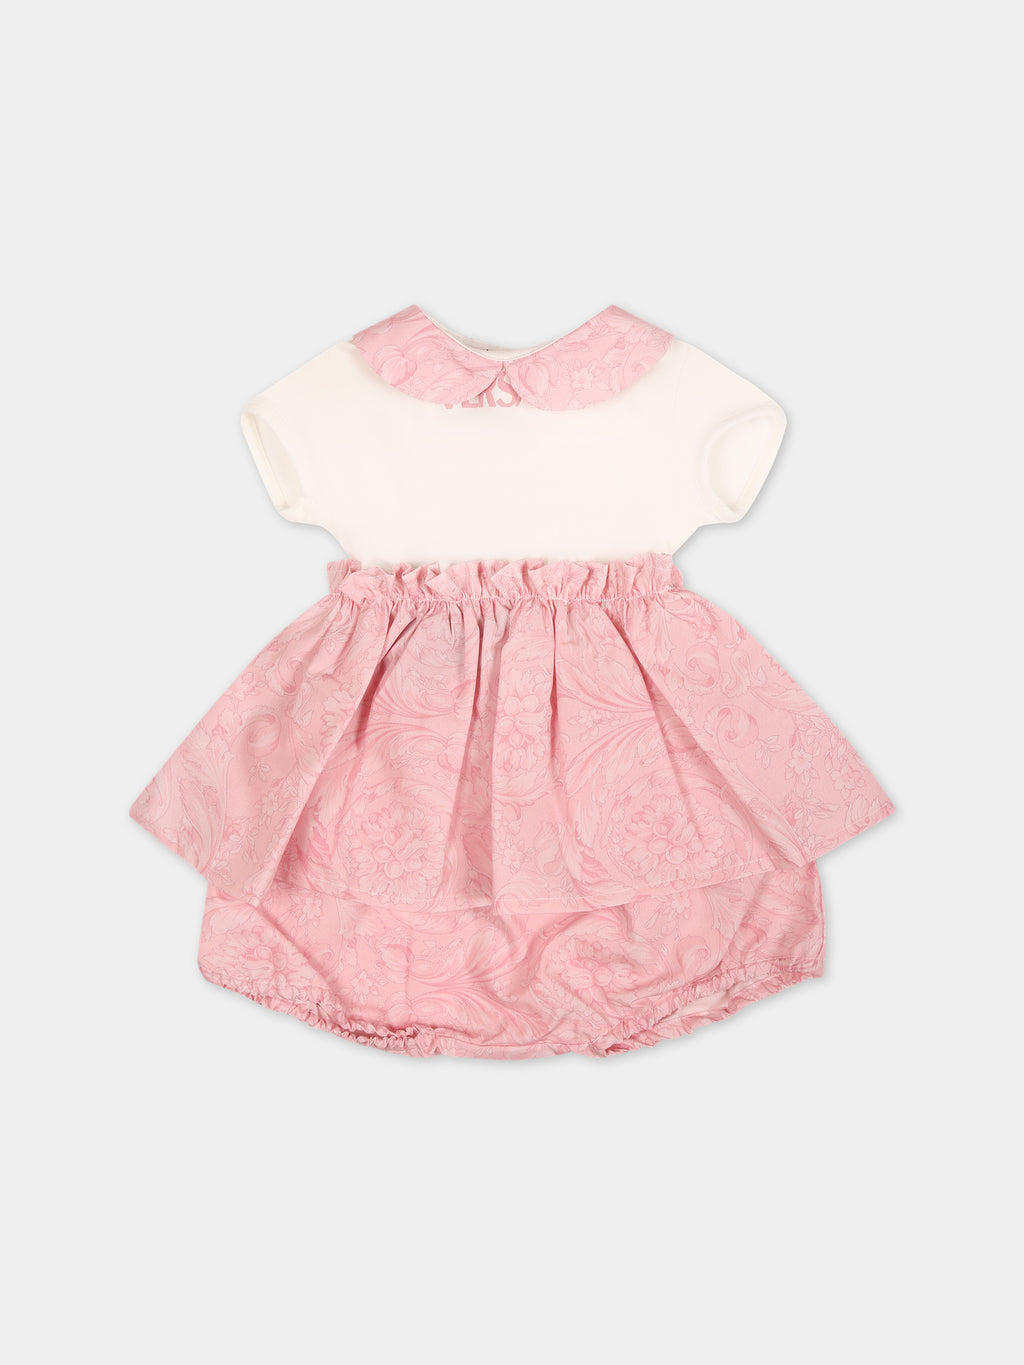 Pink dress for baby girl with baroque print